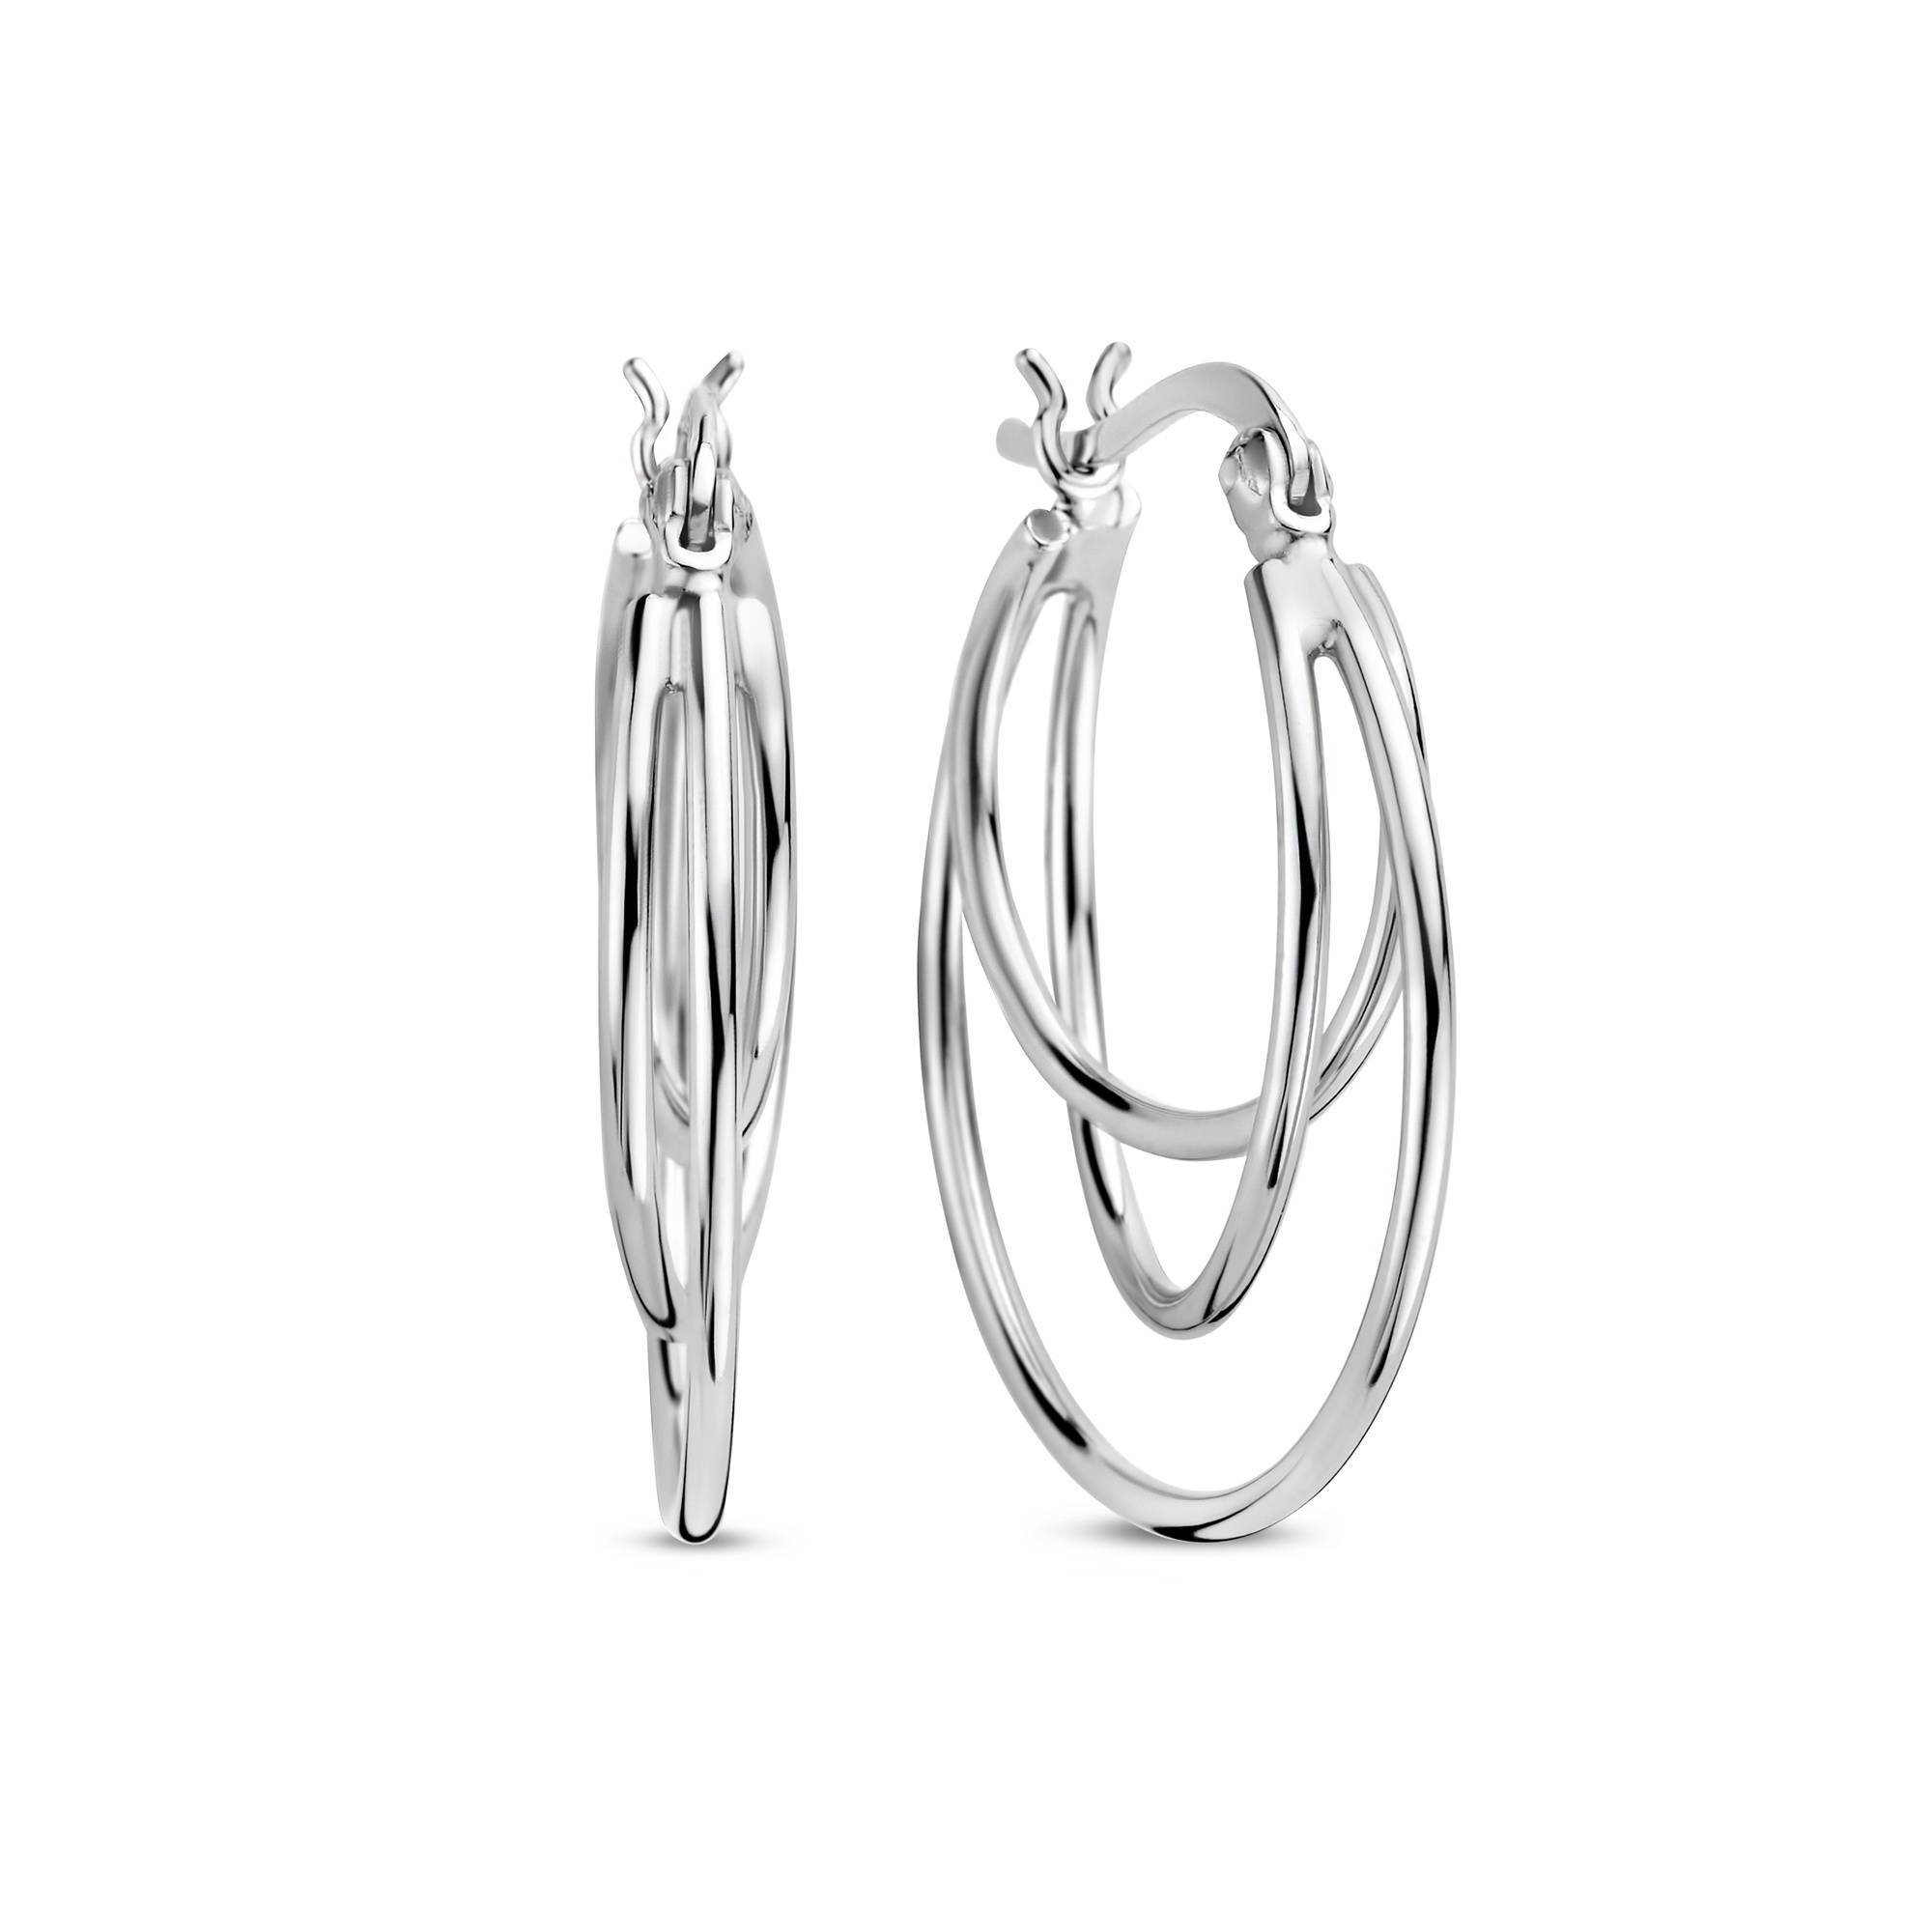 Zoé creoler i 925 sterling silver